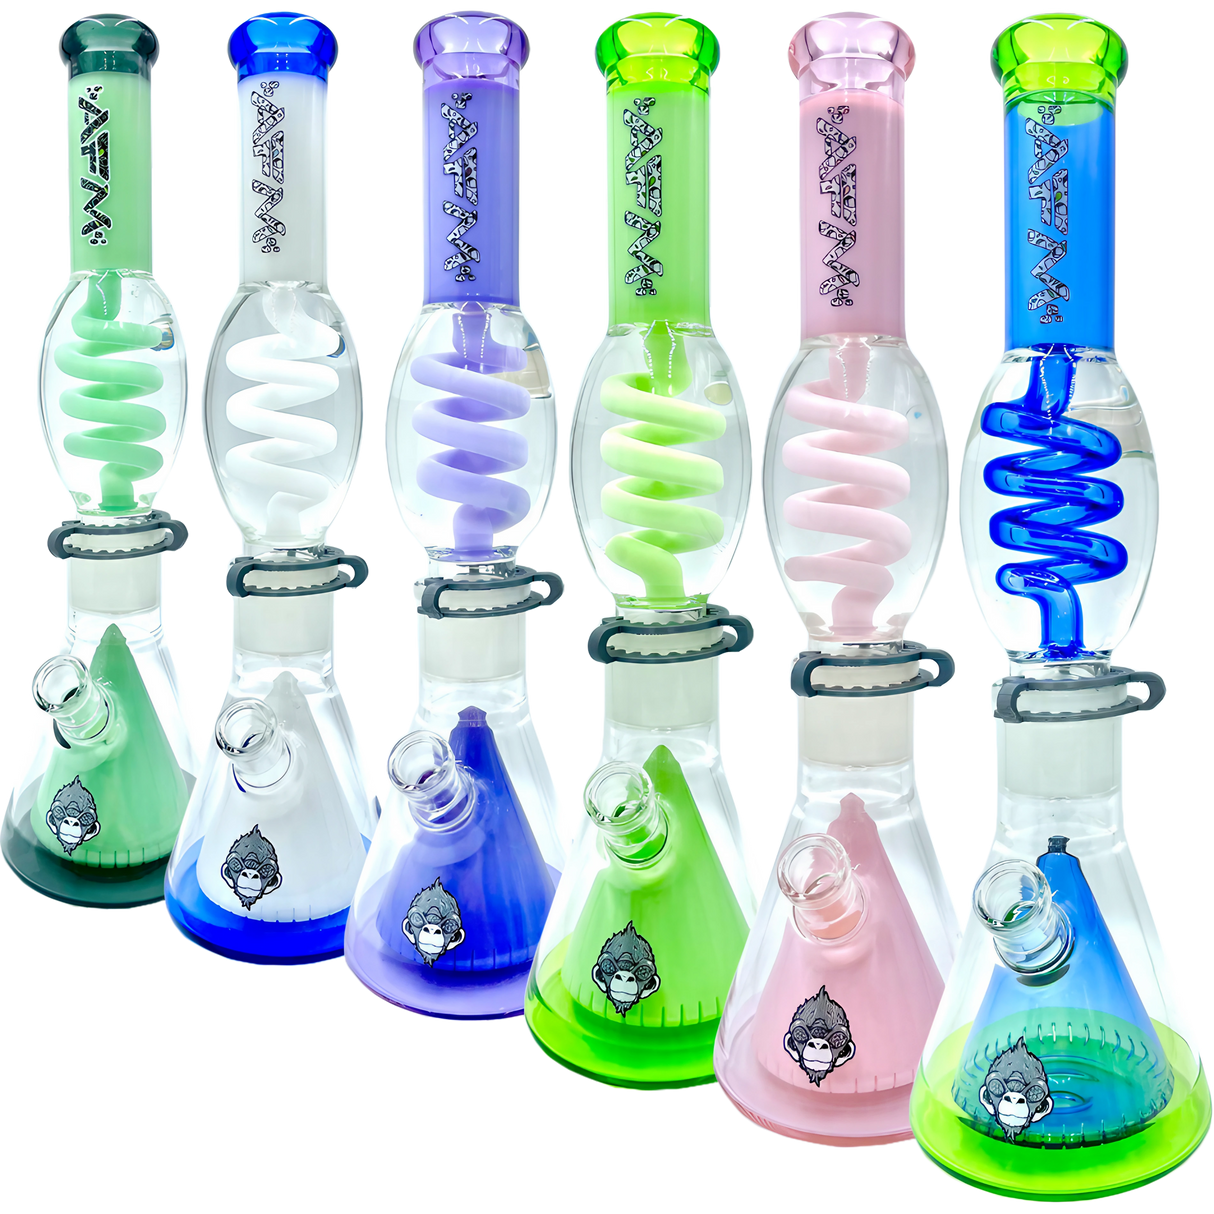 AFM The Ufo Pyramid Freezable Coil Set bongs in various colors with clear beaker bases, side view.